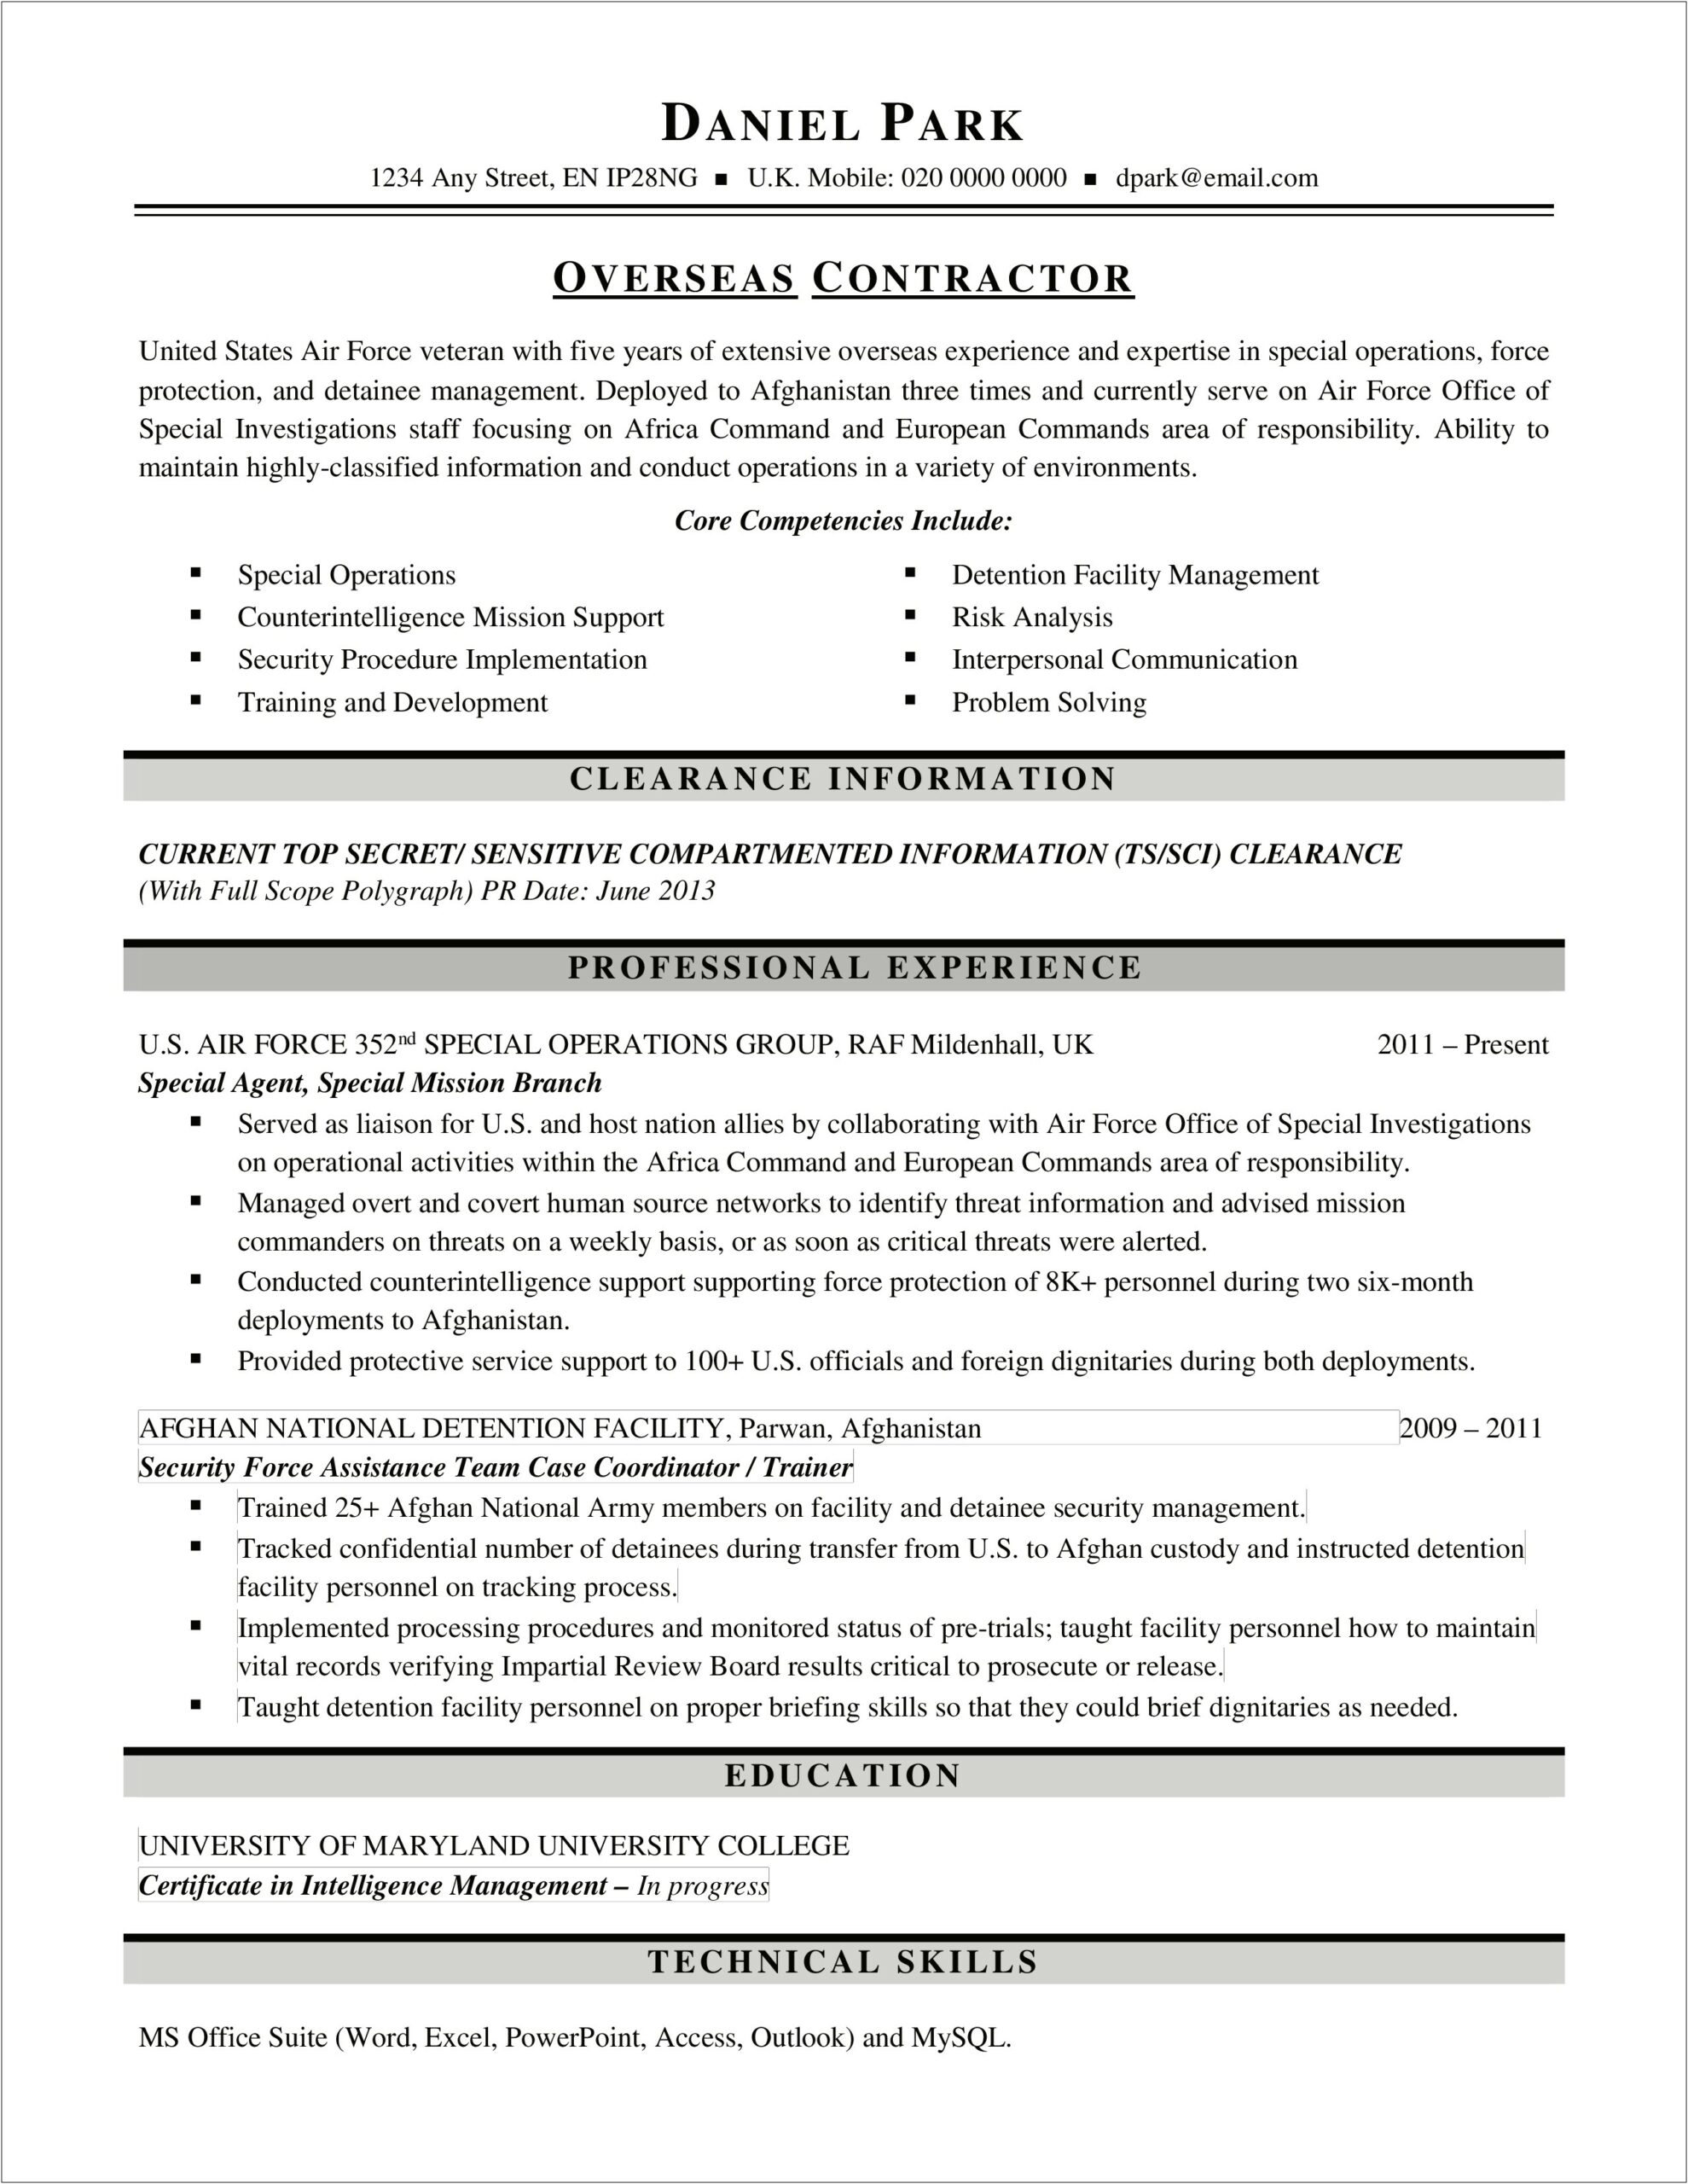 Resume Objective For Contract Job